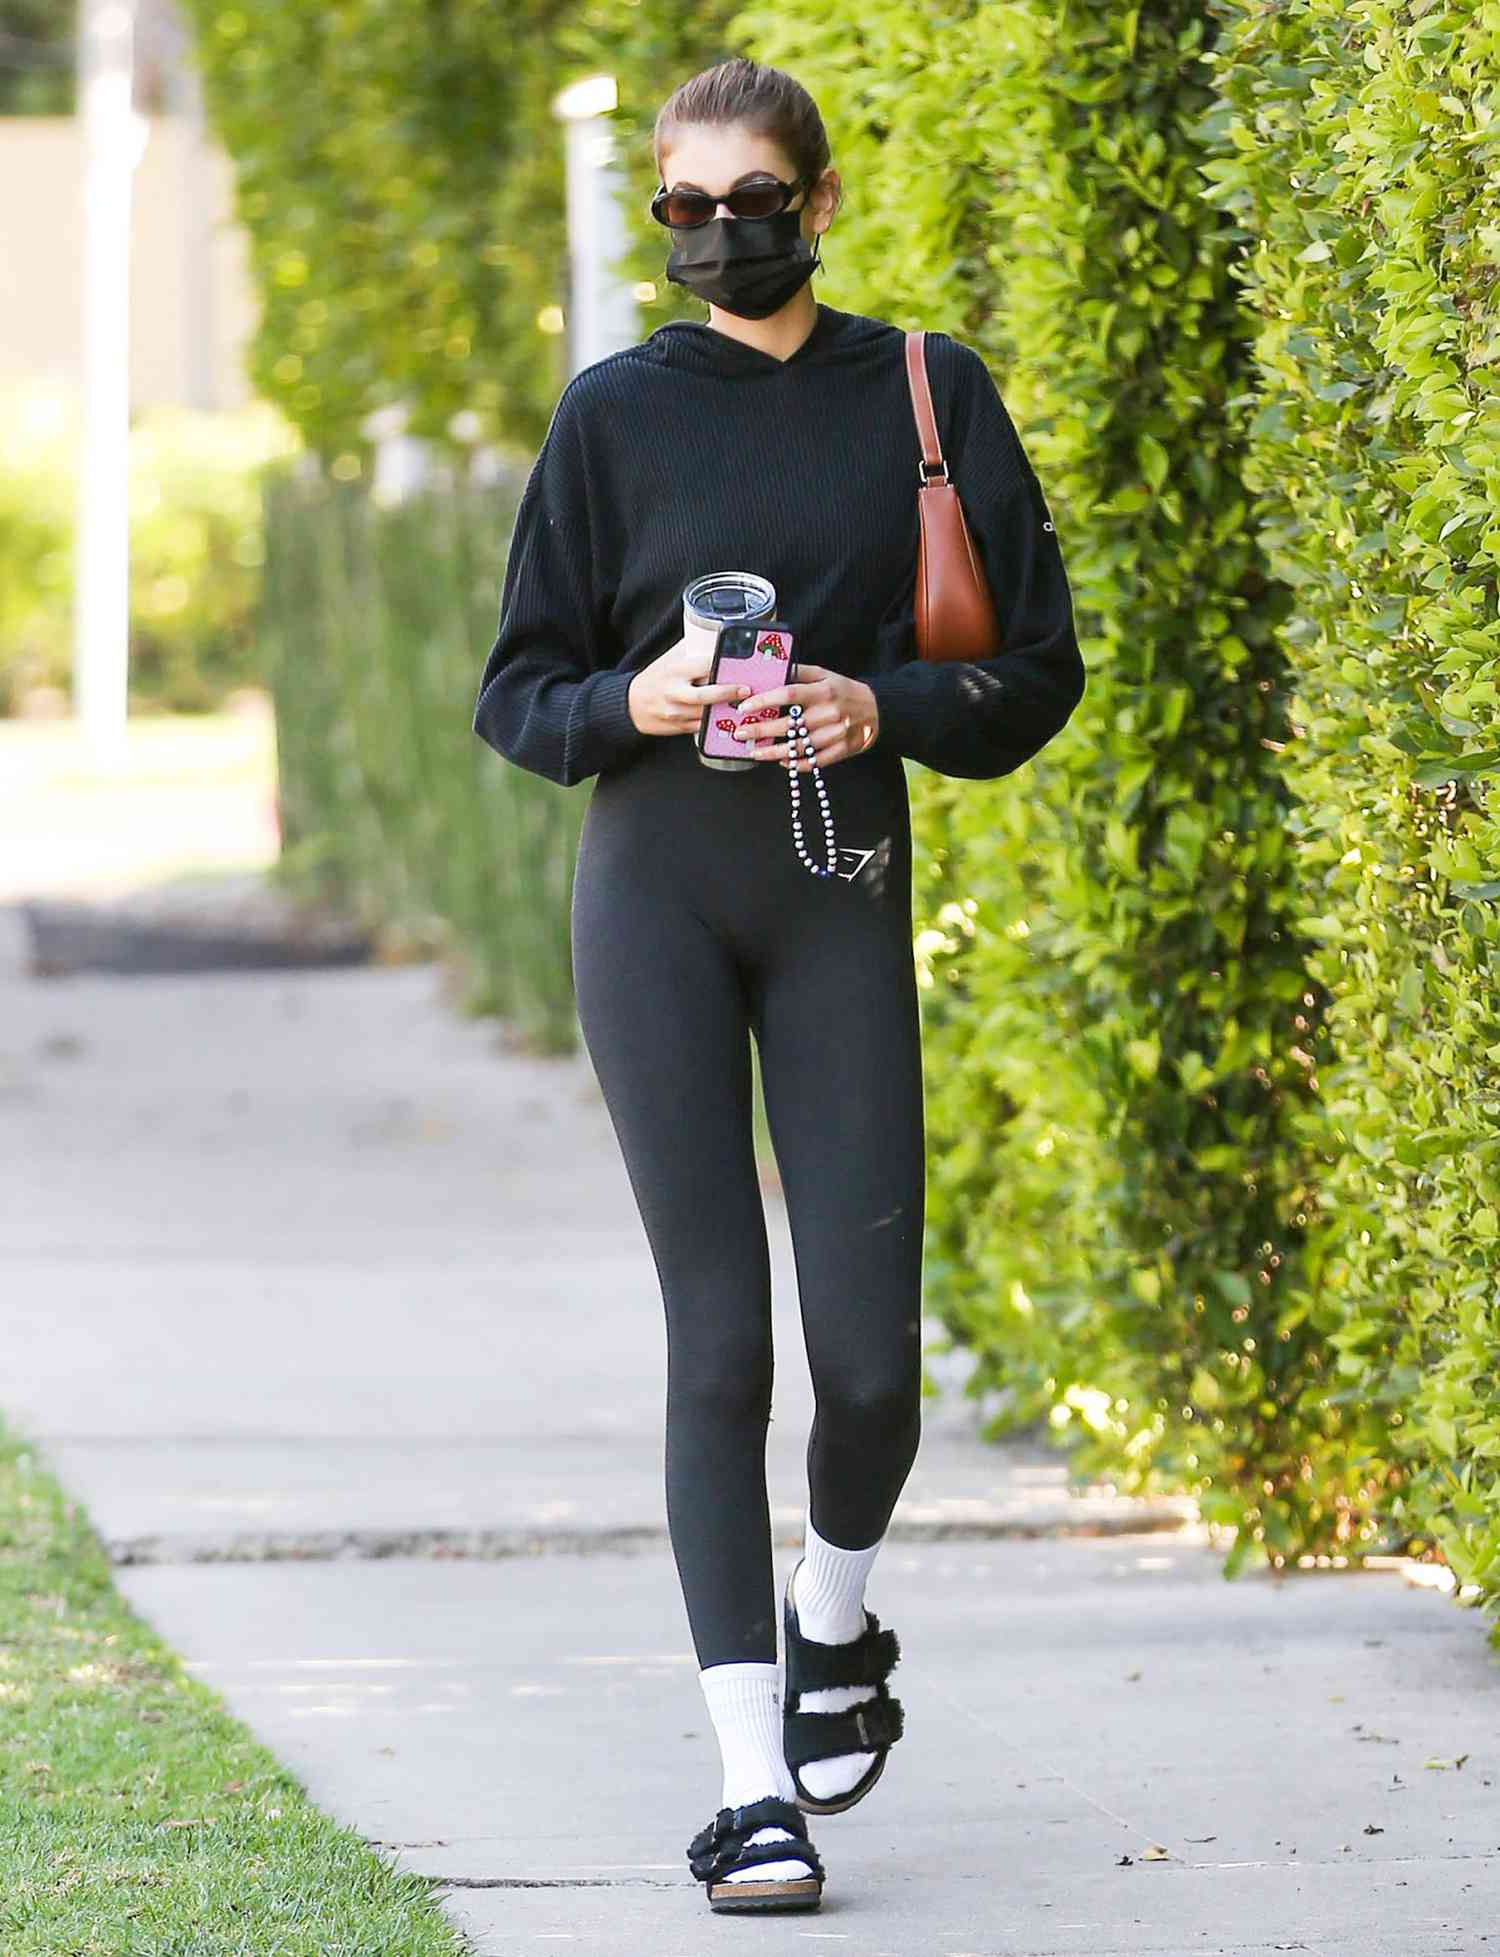 Kaia Gerber is seen on April 01, 2021 in Los Angeles, California